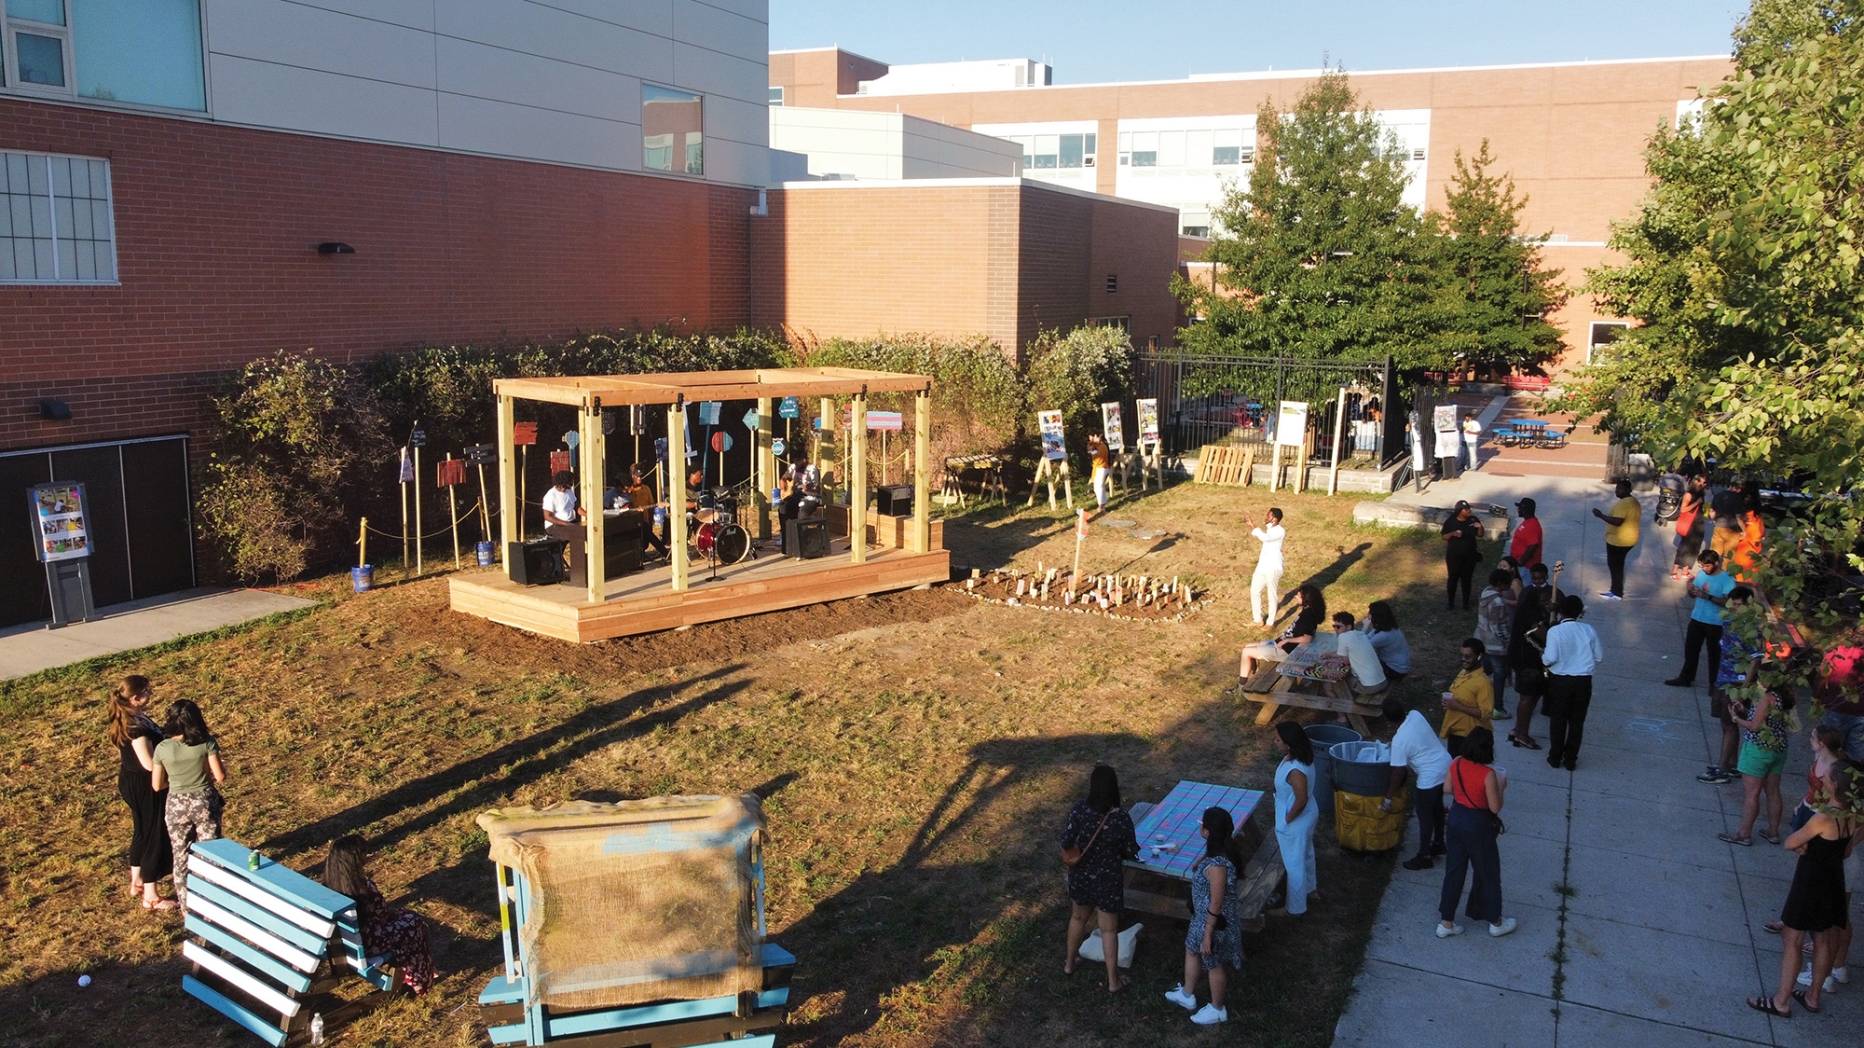 A view of the school yard with the wooden structure and a band playing on it